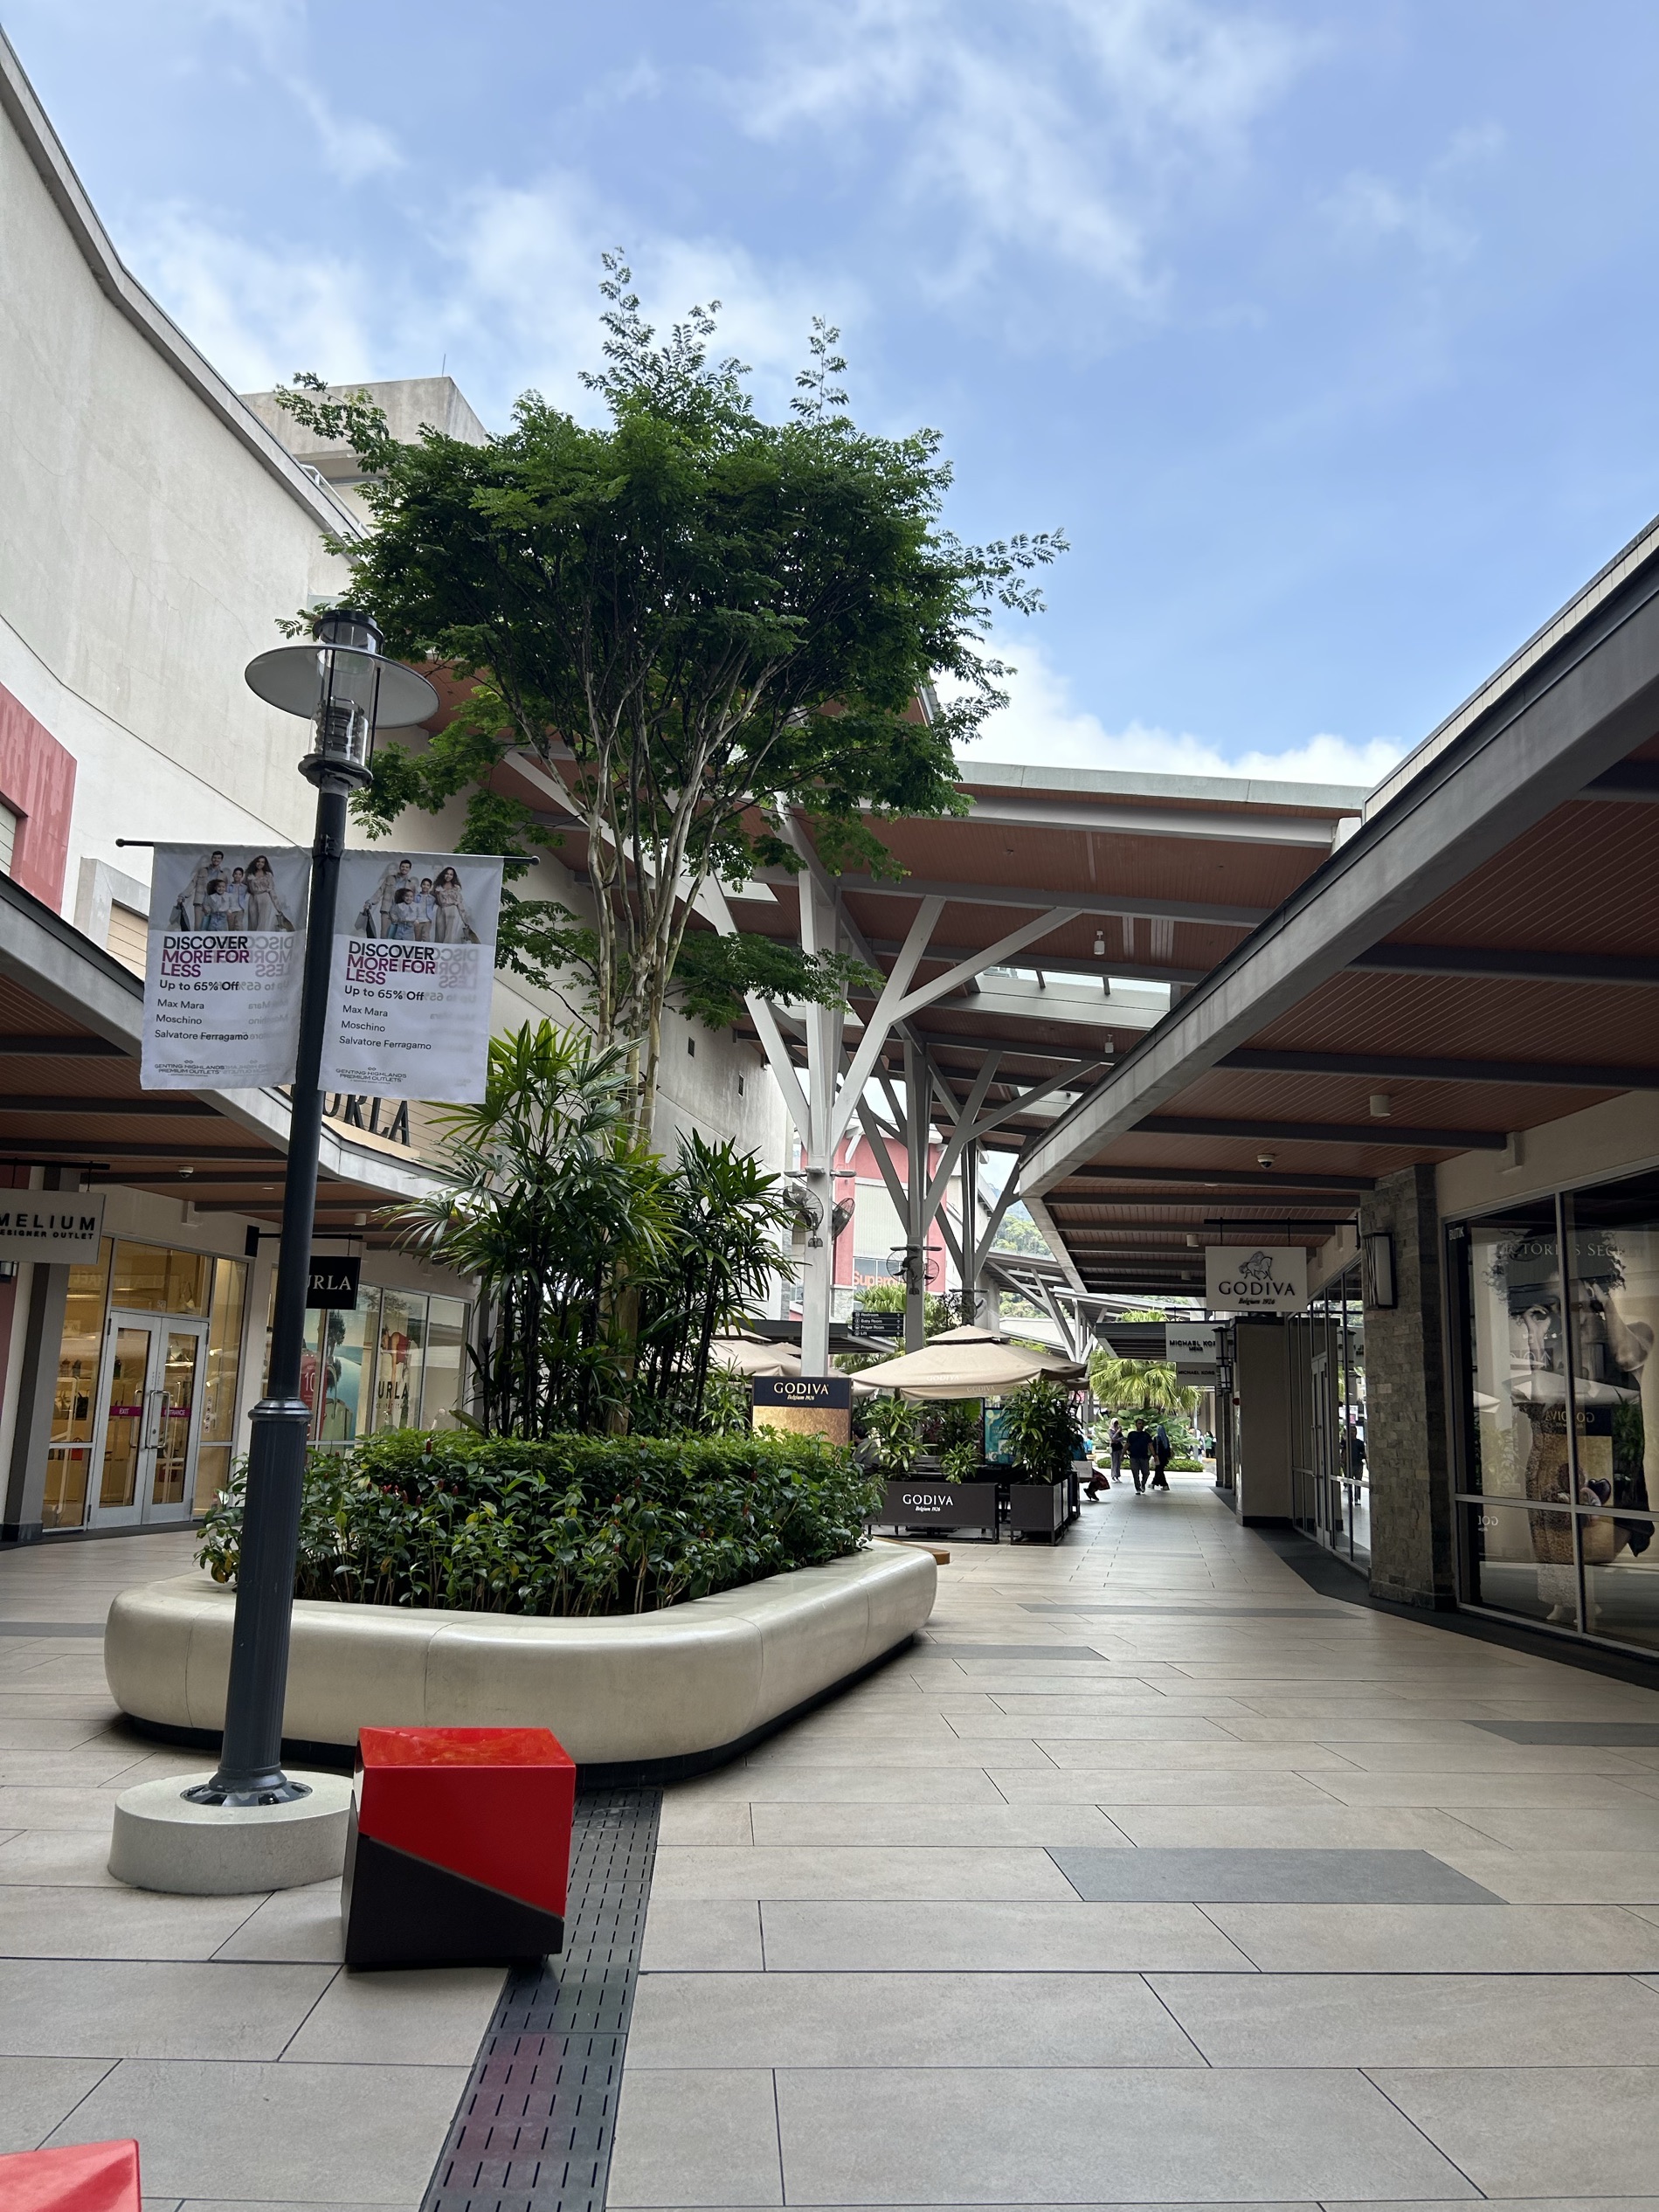 So this is Genting Highlands Premium Outlets! Super Lamig!